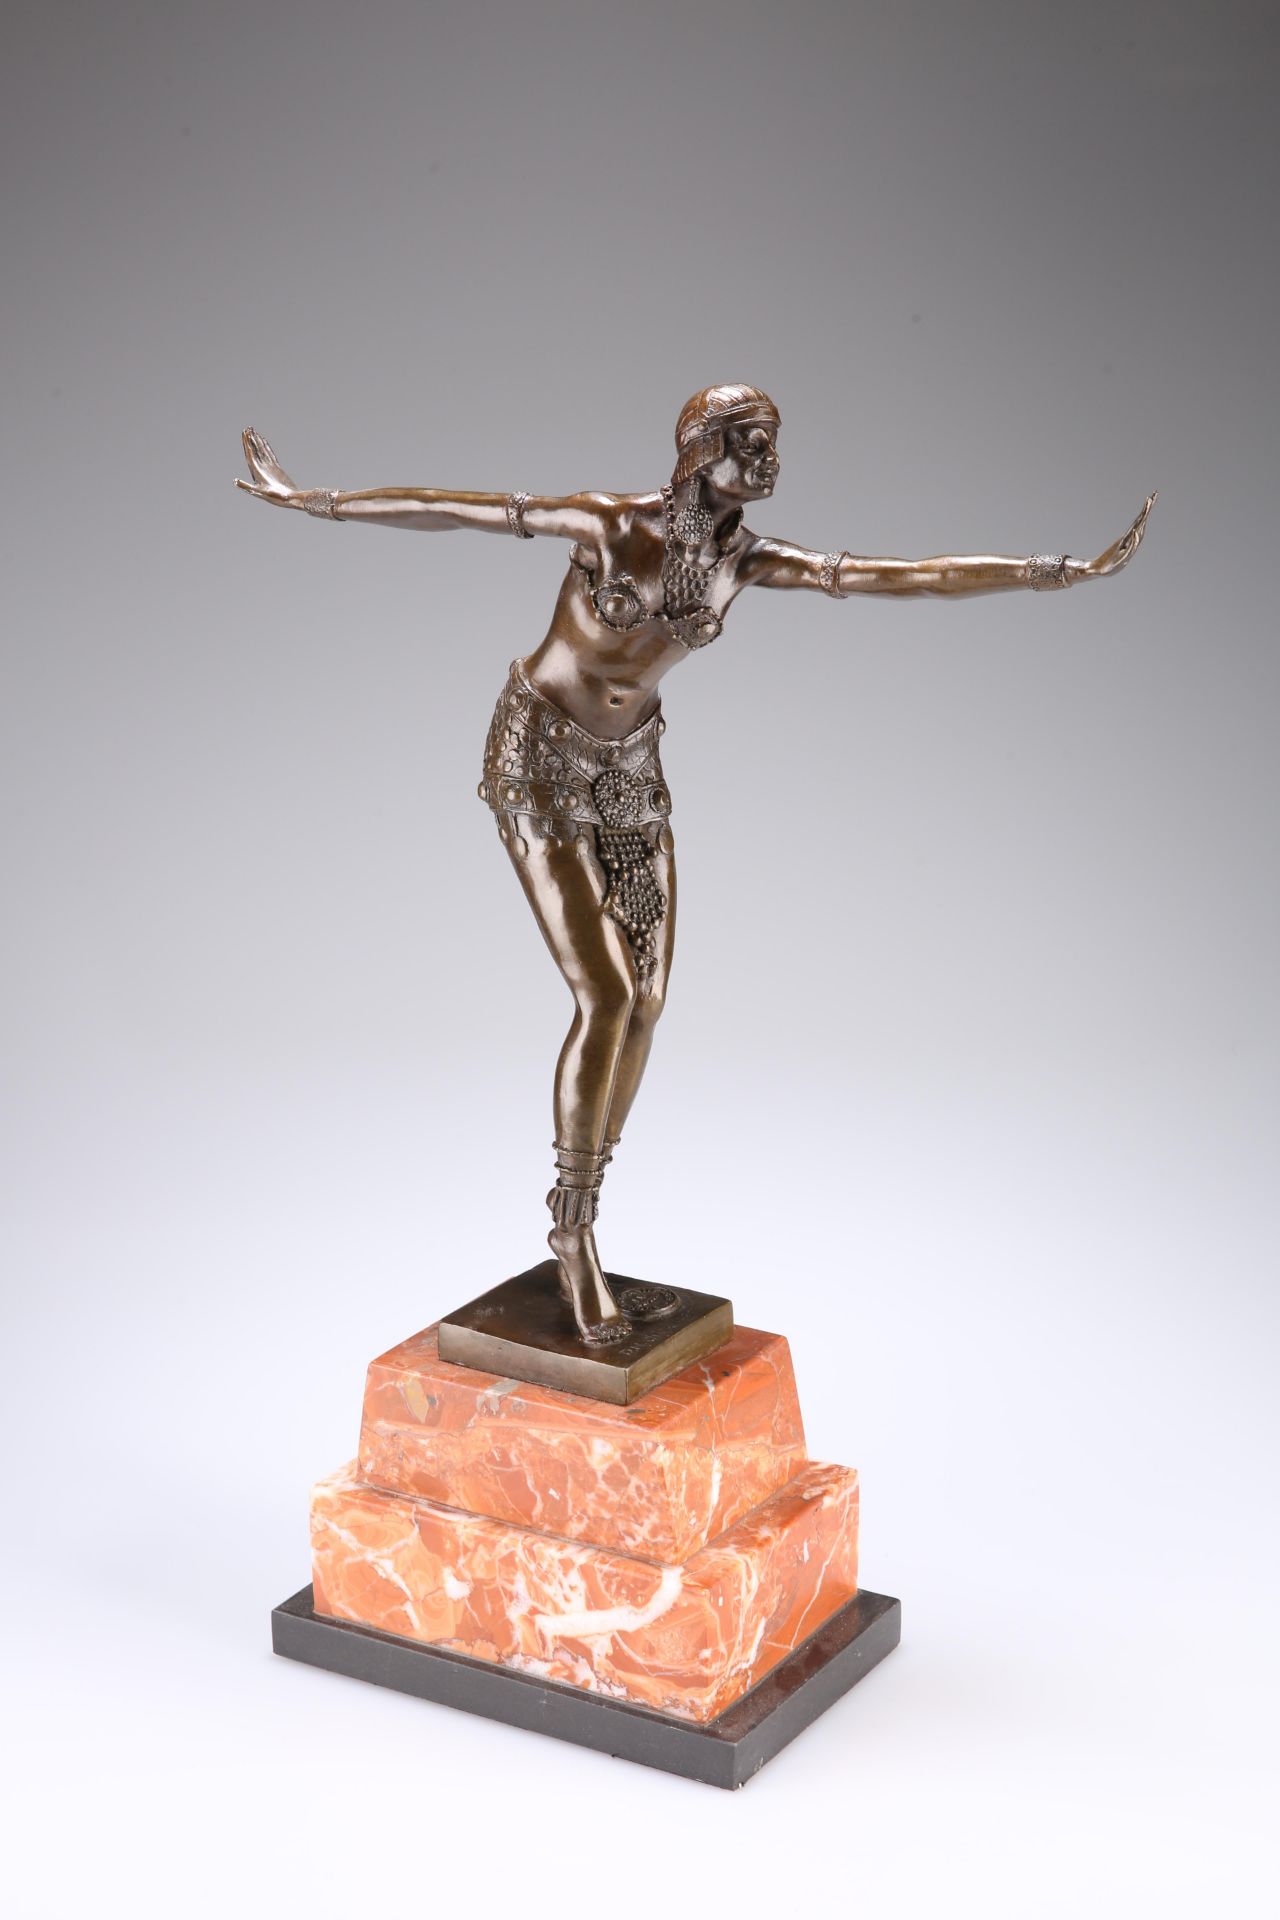 AN ART DECO STYLE BRONZE FIGURE OF A DANCER, in Ballet Russe costume, posing with arms